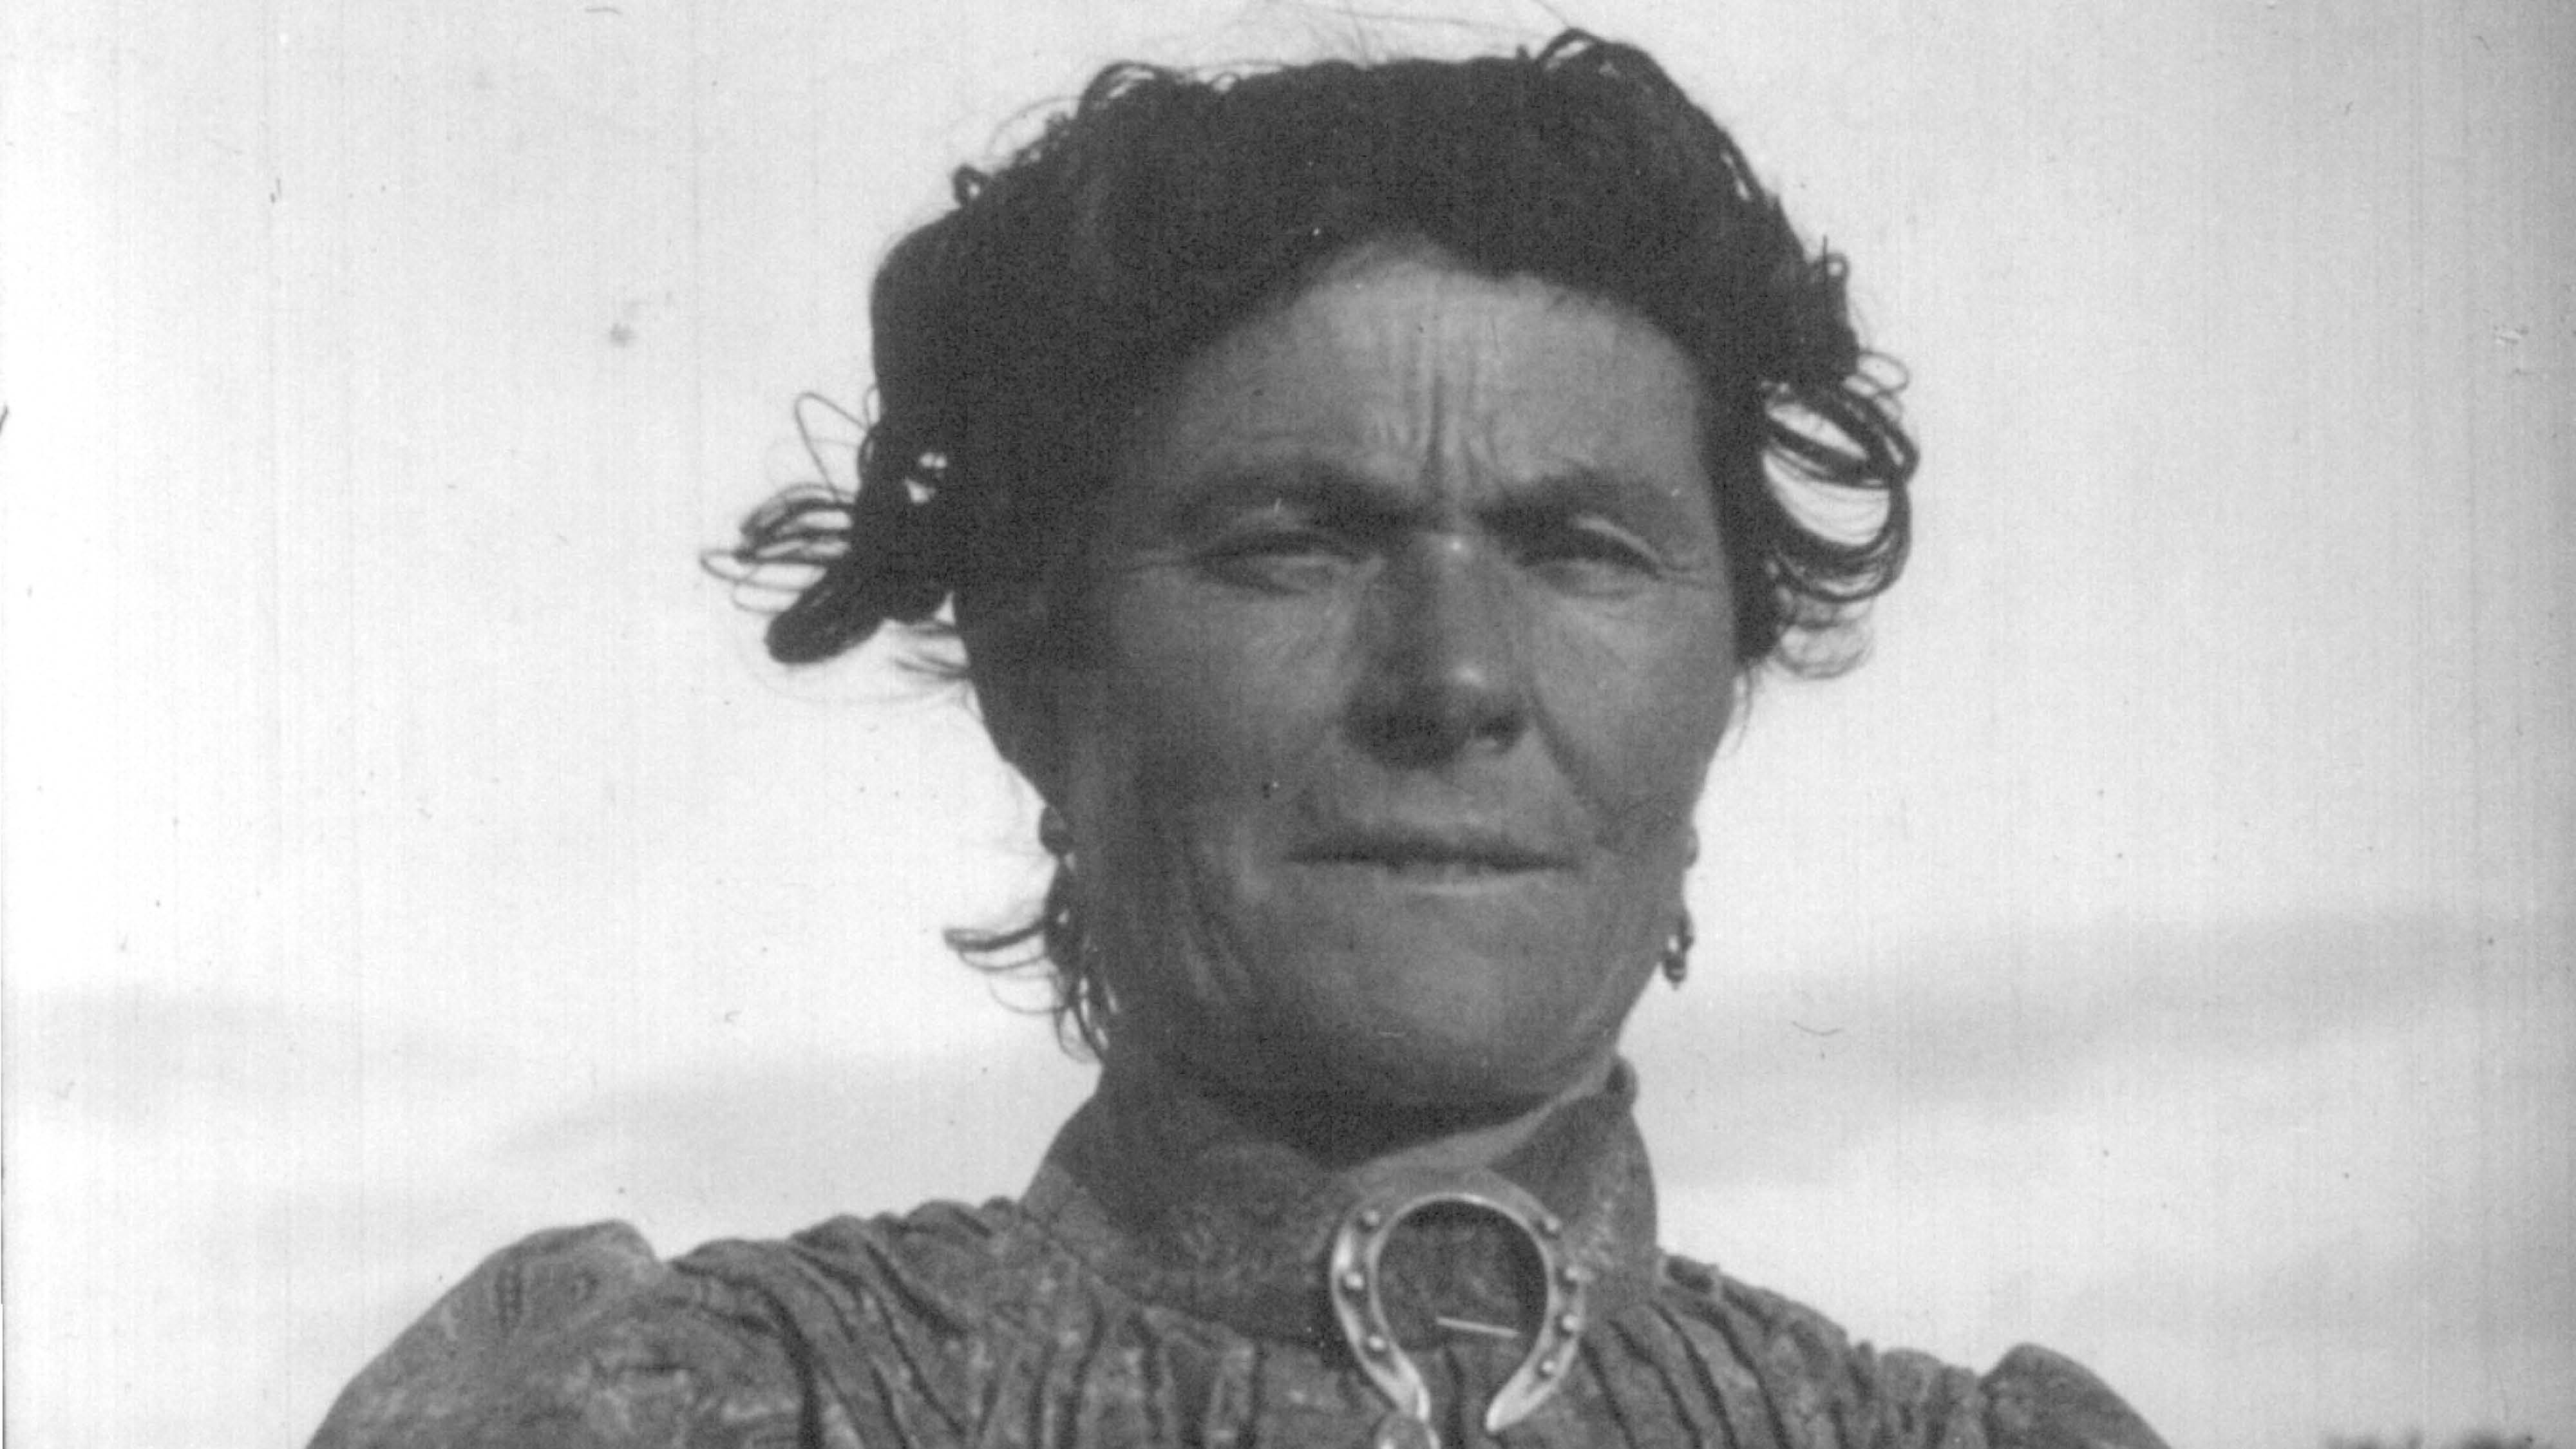 historical image of female, smartly dressed with a horse-shoe shaped broach under her chin